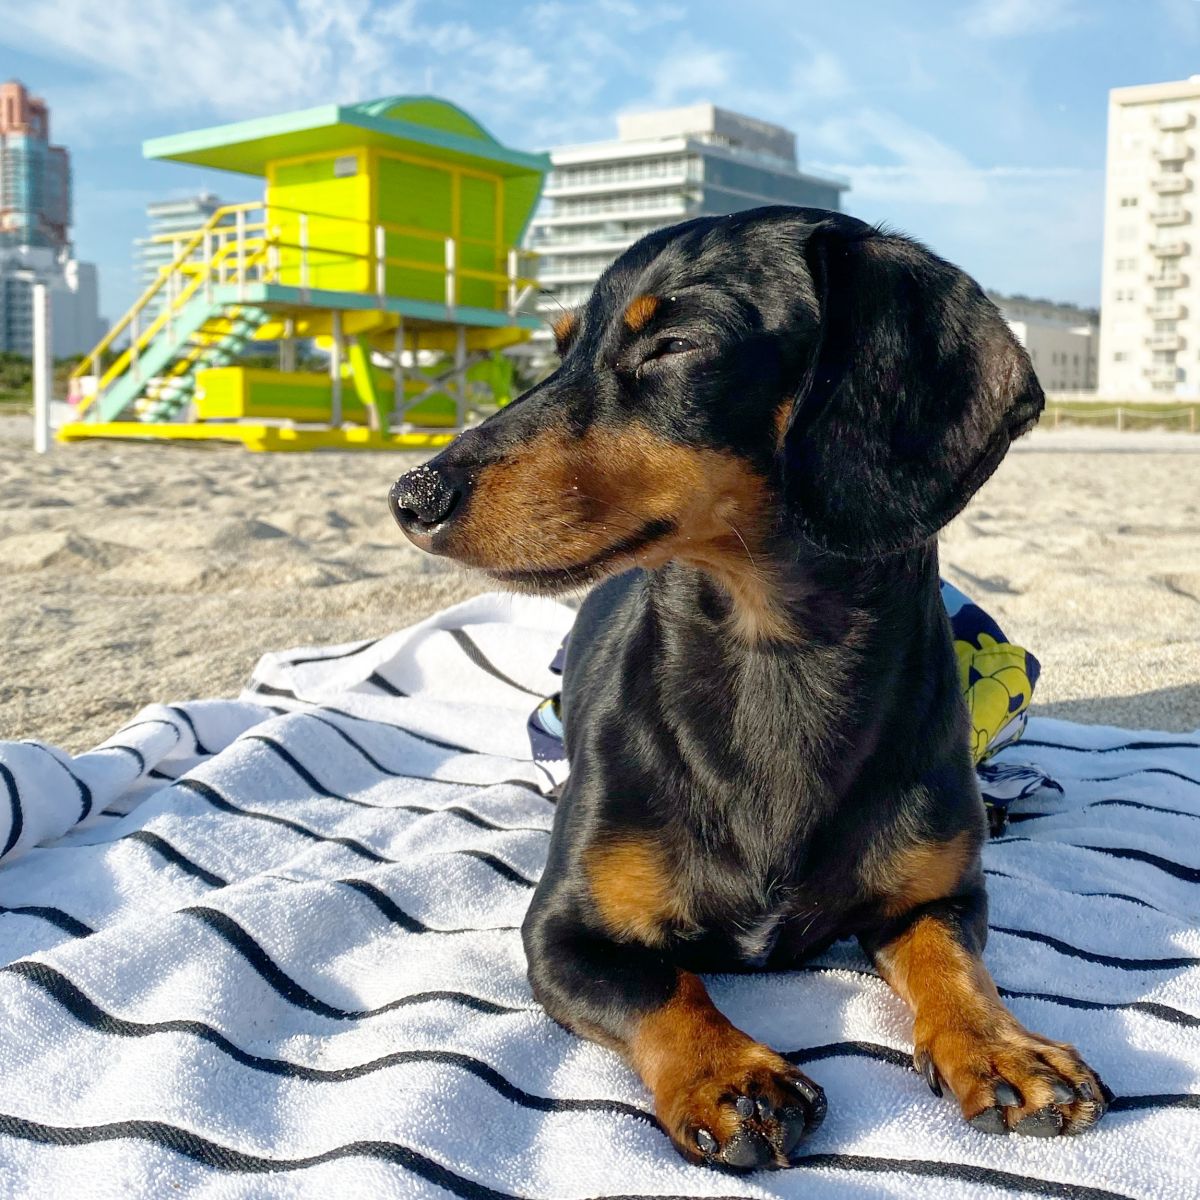 Crusoe the Dachshund lays on a beach towel in the sand in sunny Miami.